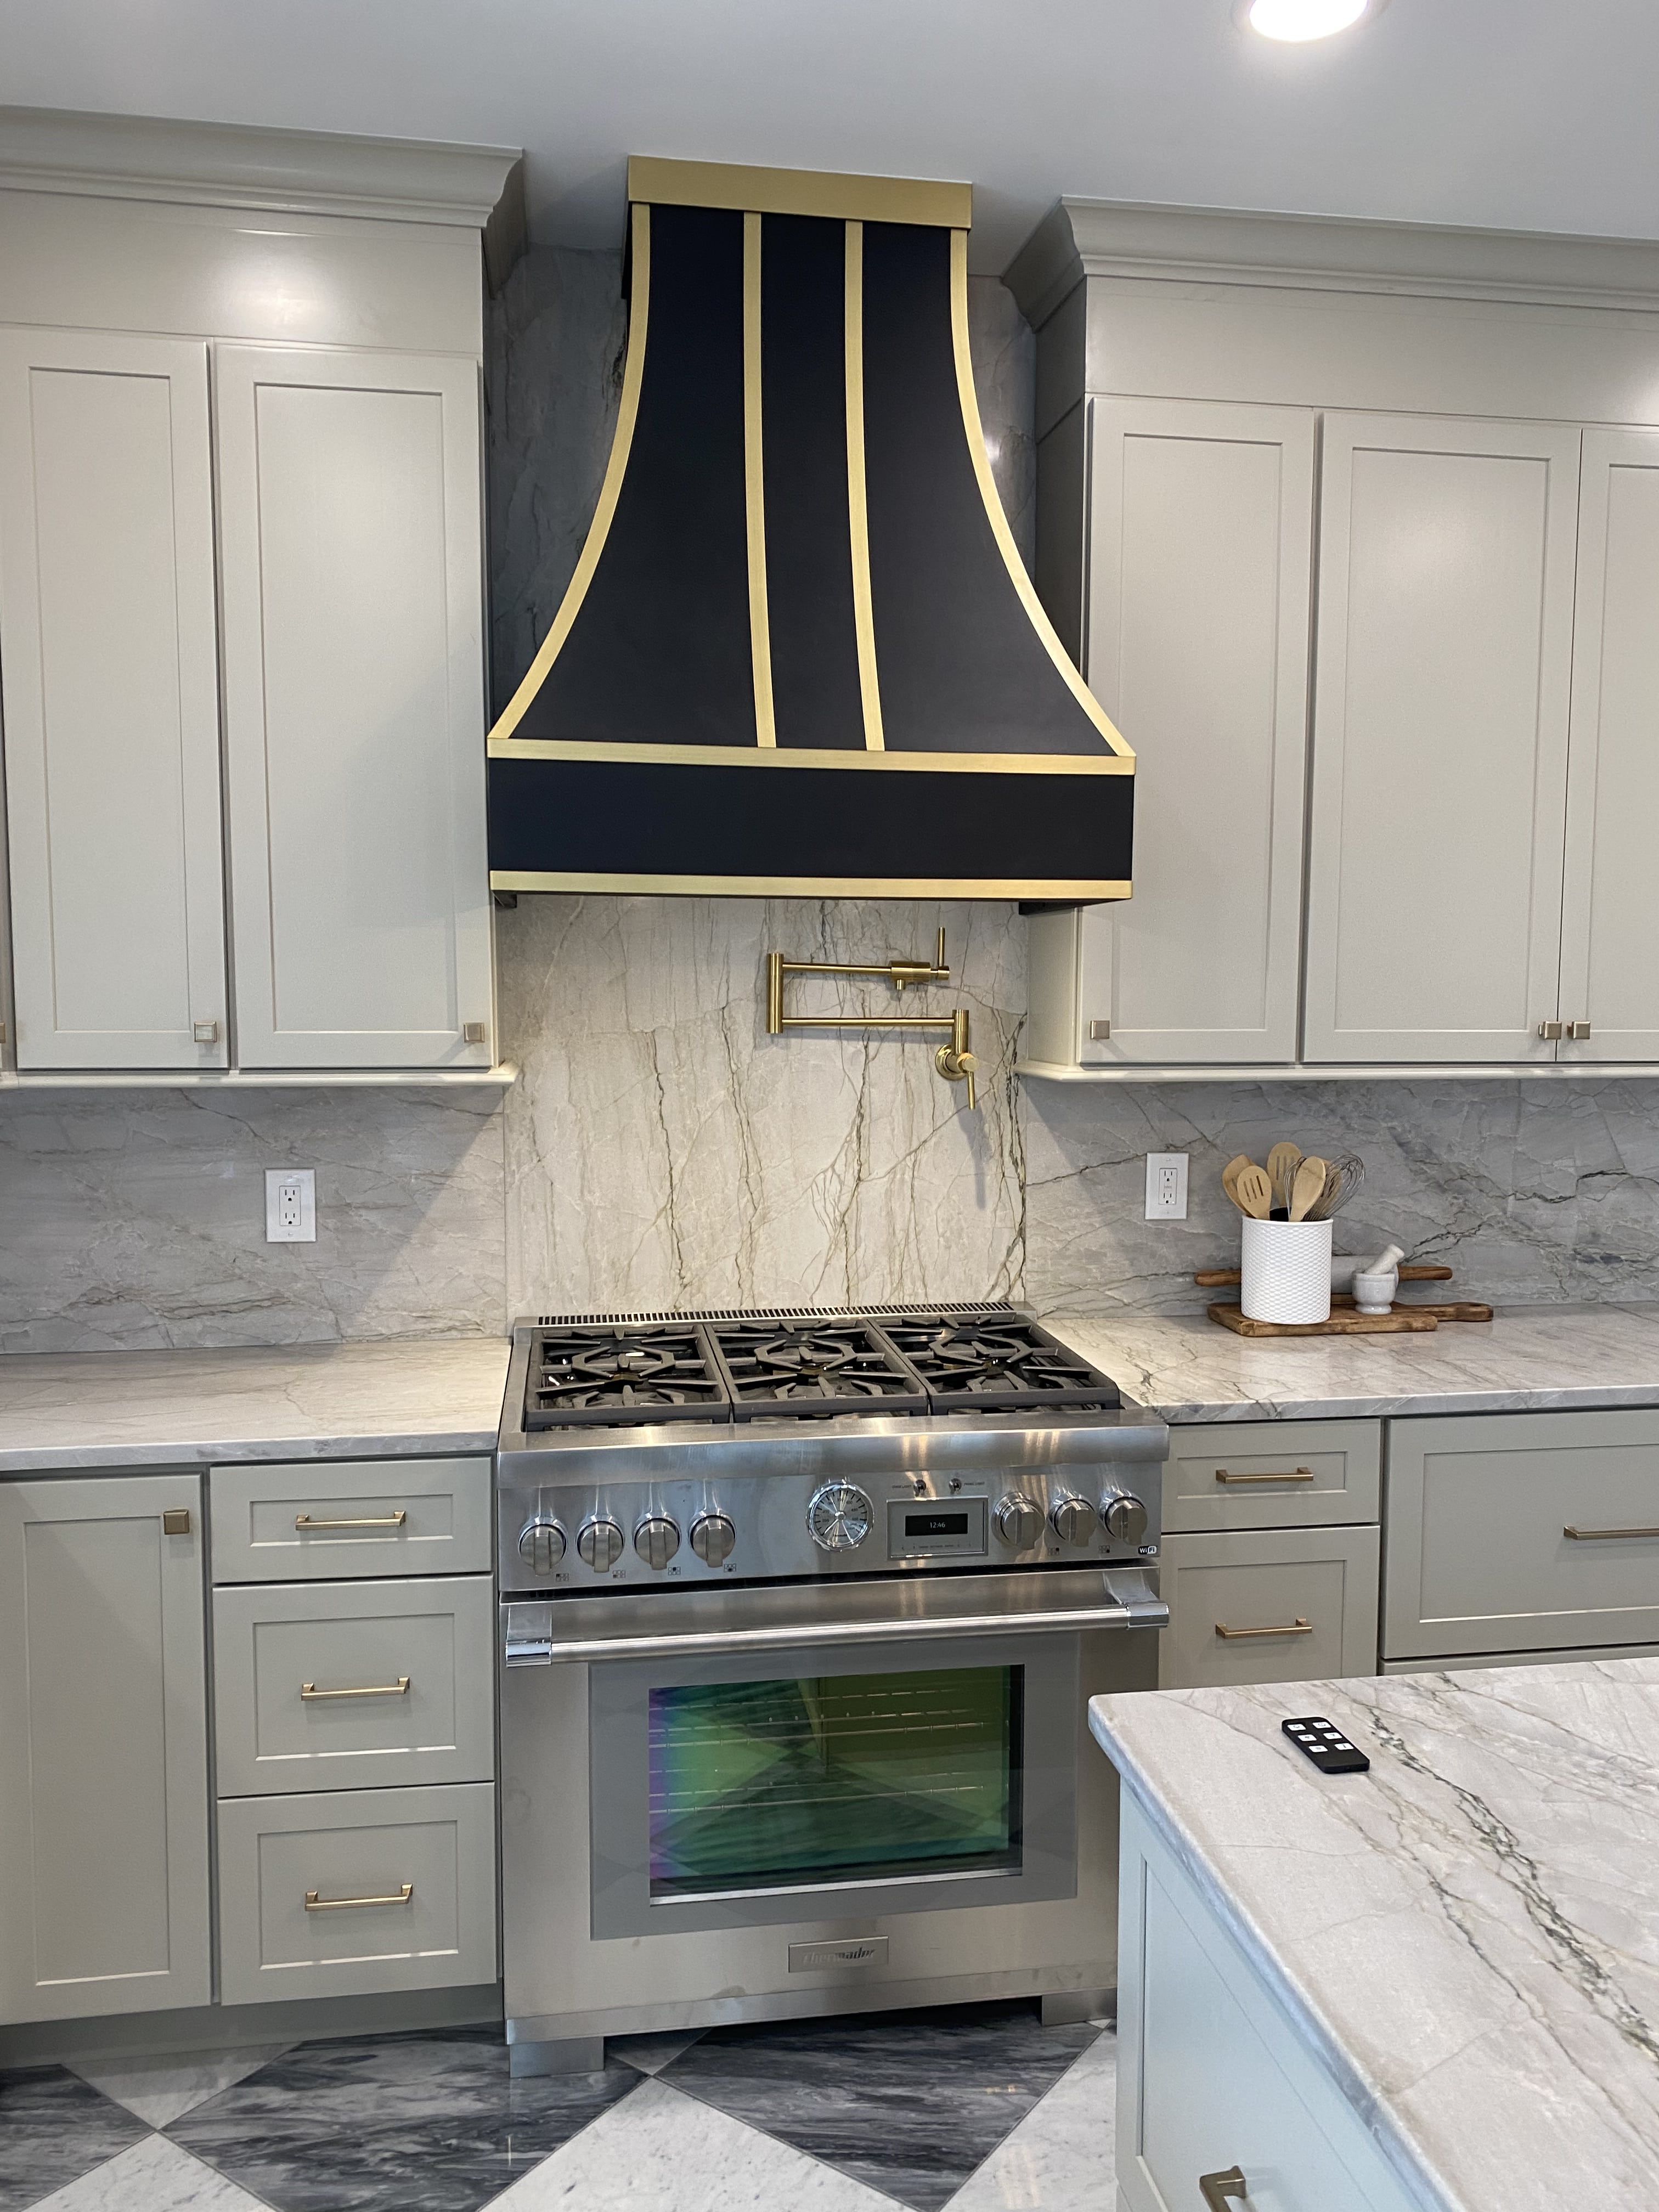 CopperSmith Signature SX4 Wall Mount Black Enamel Smooth Range Hood with Matte Brass Straps in a traditional style kitchen with Marble countertops marble tile backsplash and white cabinetry